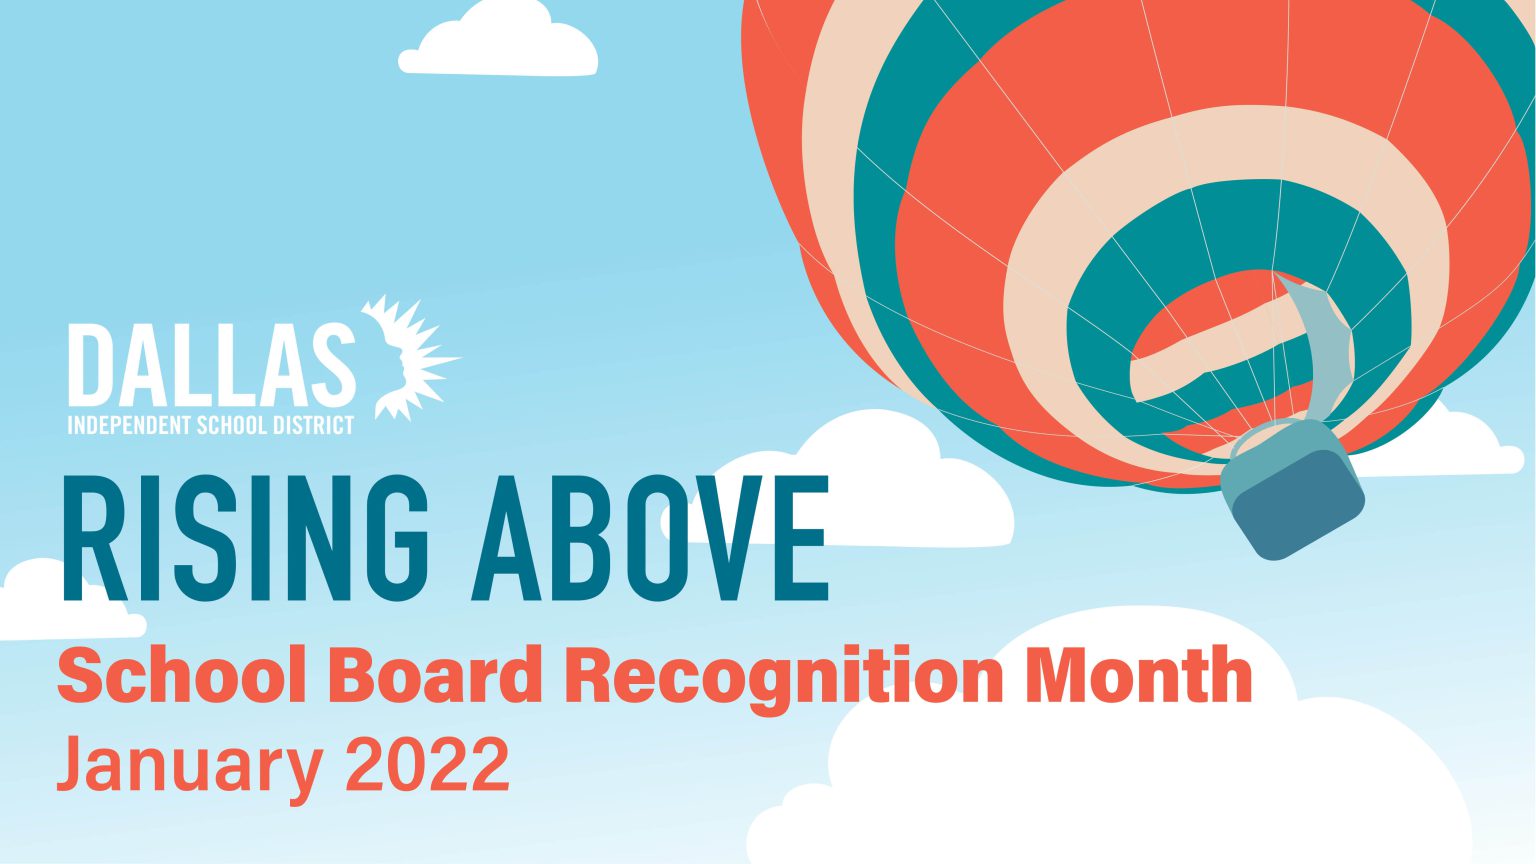 Join us in celebrating School Board Recognition Month!